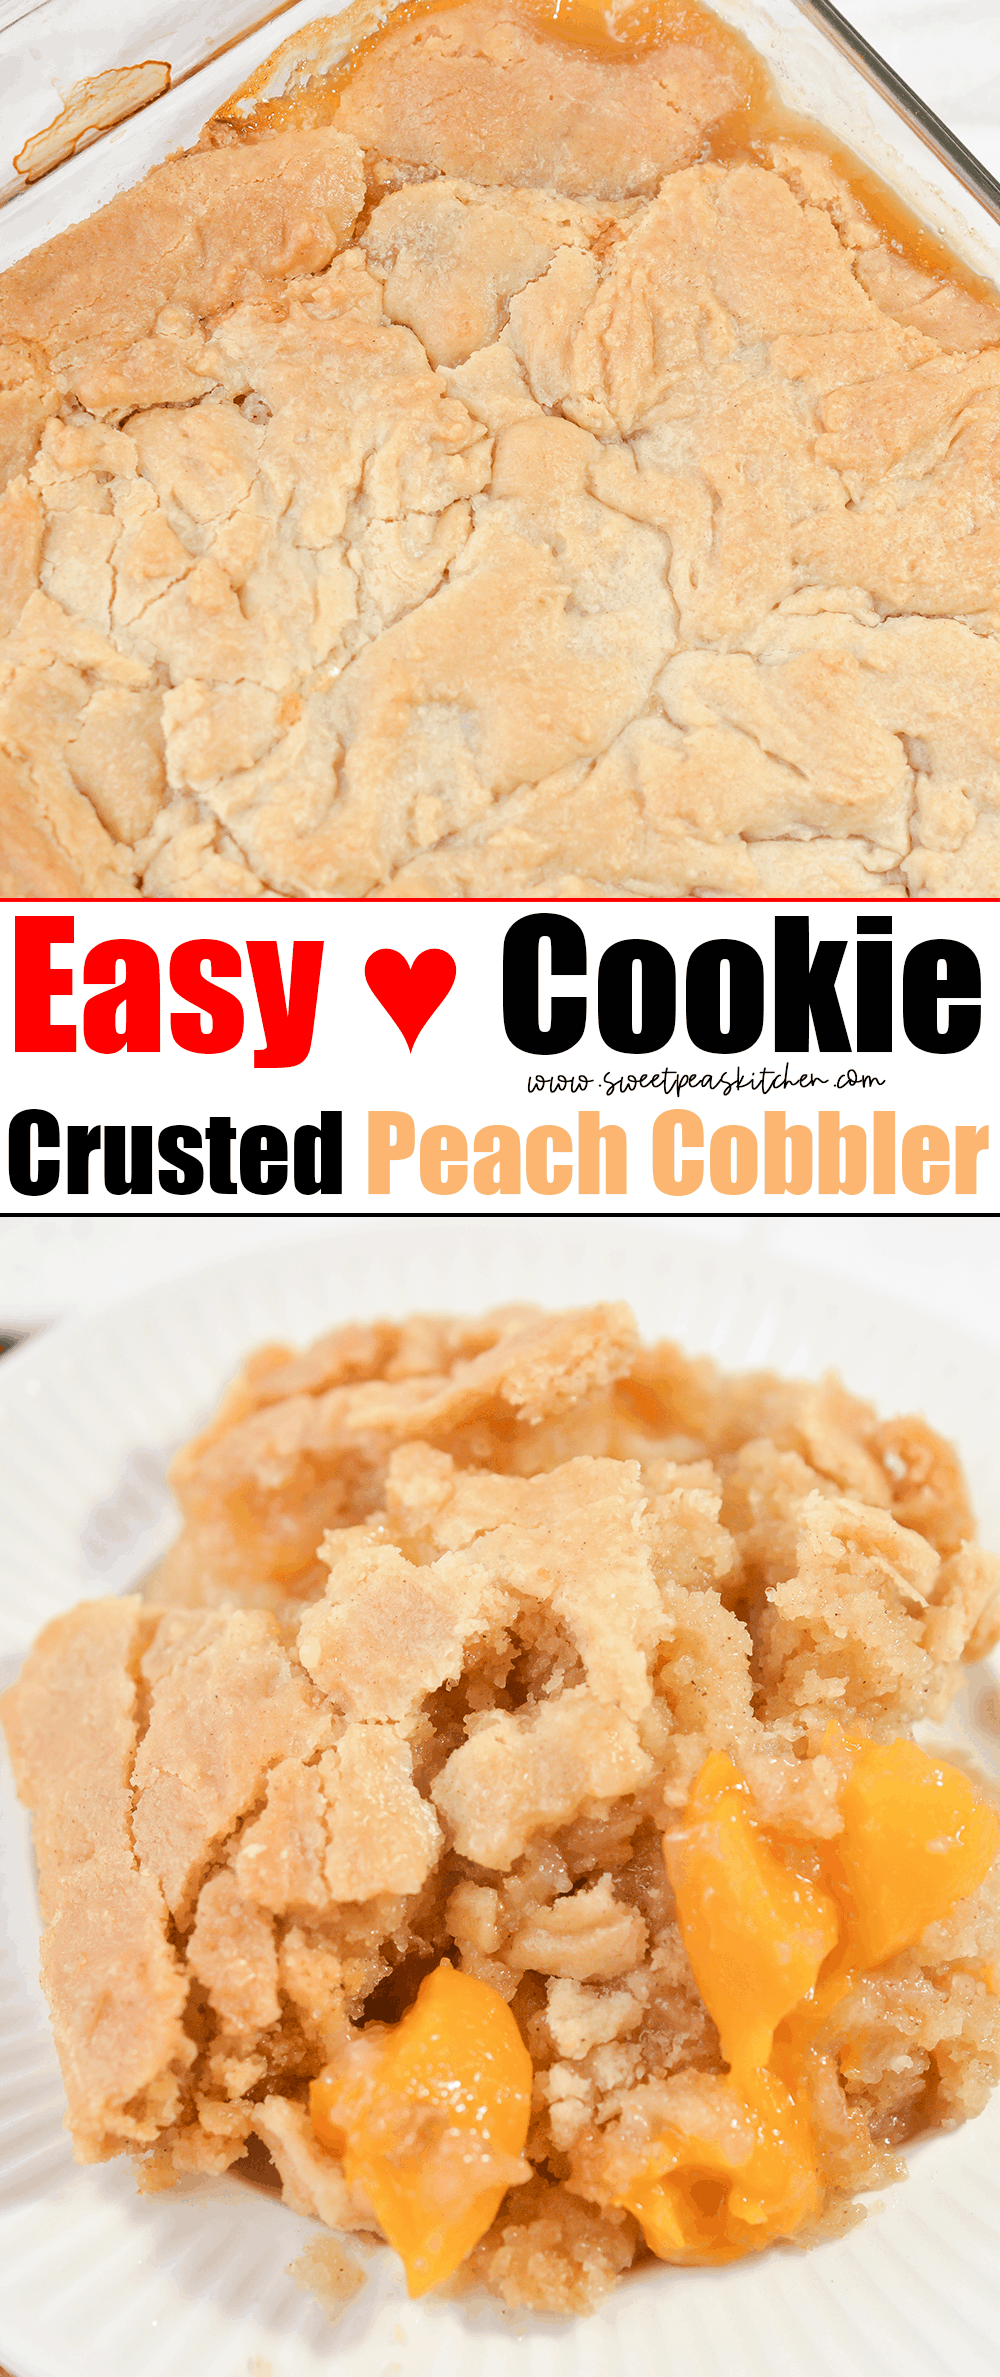 Cookie Crusted Peach Cobbler on Pinterest